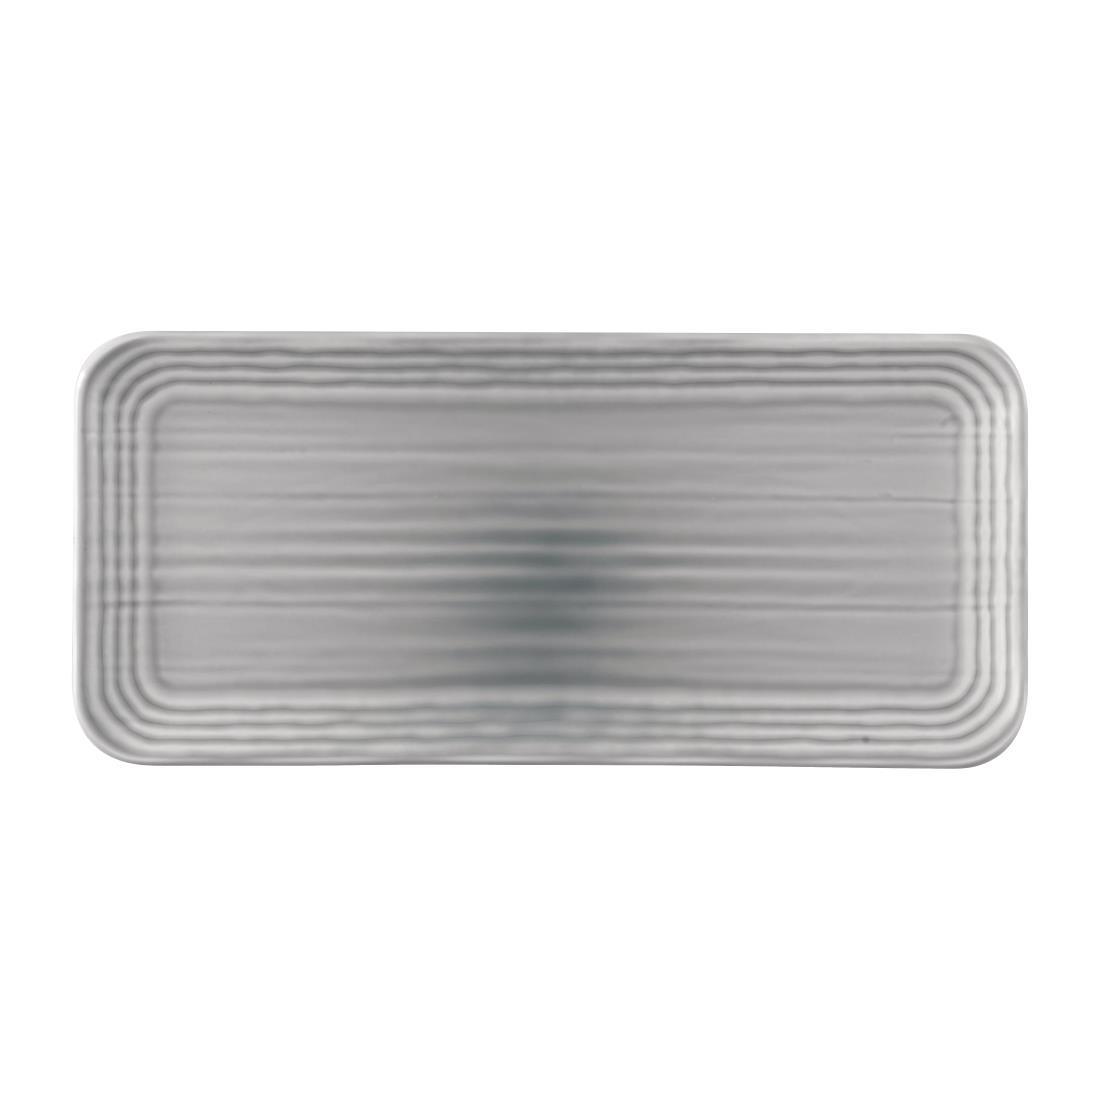 Dudson Harvest Norse Organic Coupe Rect Platter Grey 338x155mm (Pack of 6) - FS799  - 1